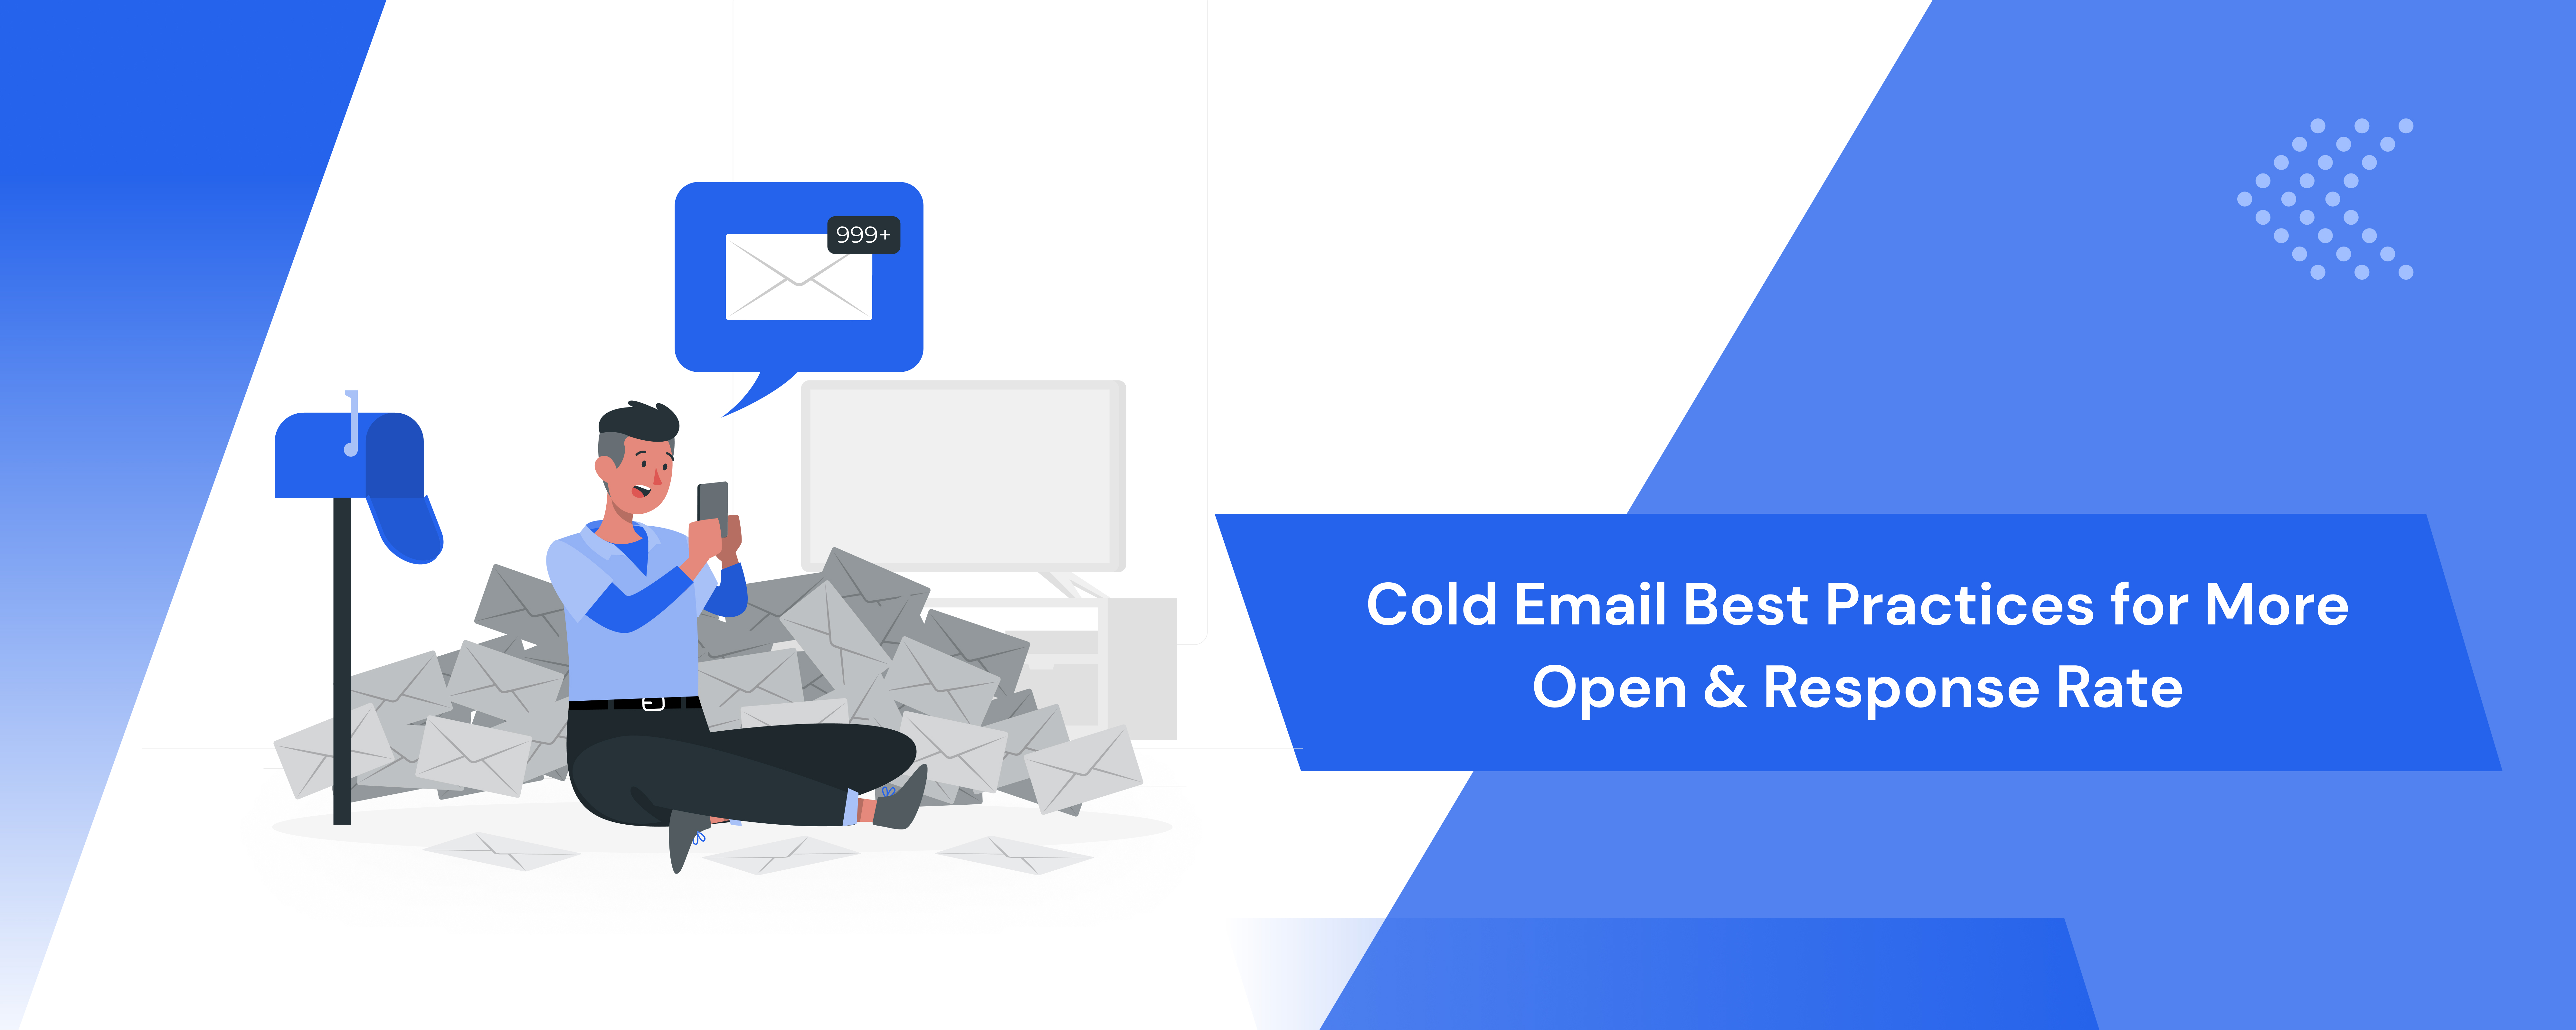 Cold Email Best Practices for More Open & Response Rate